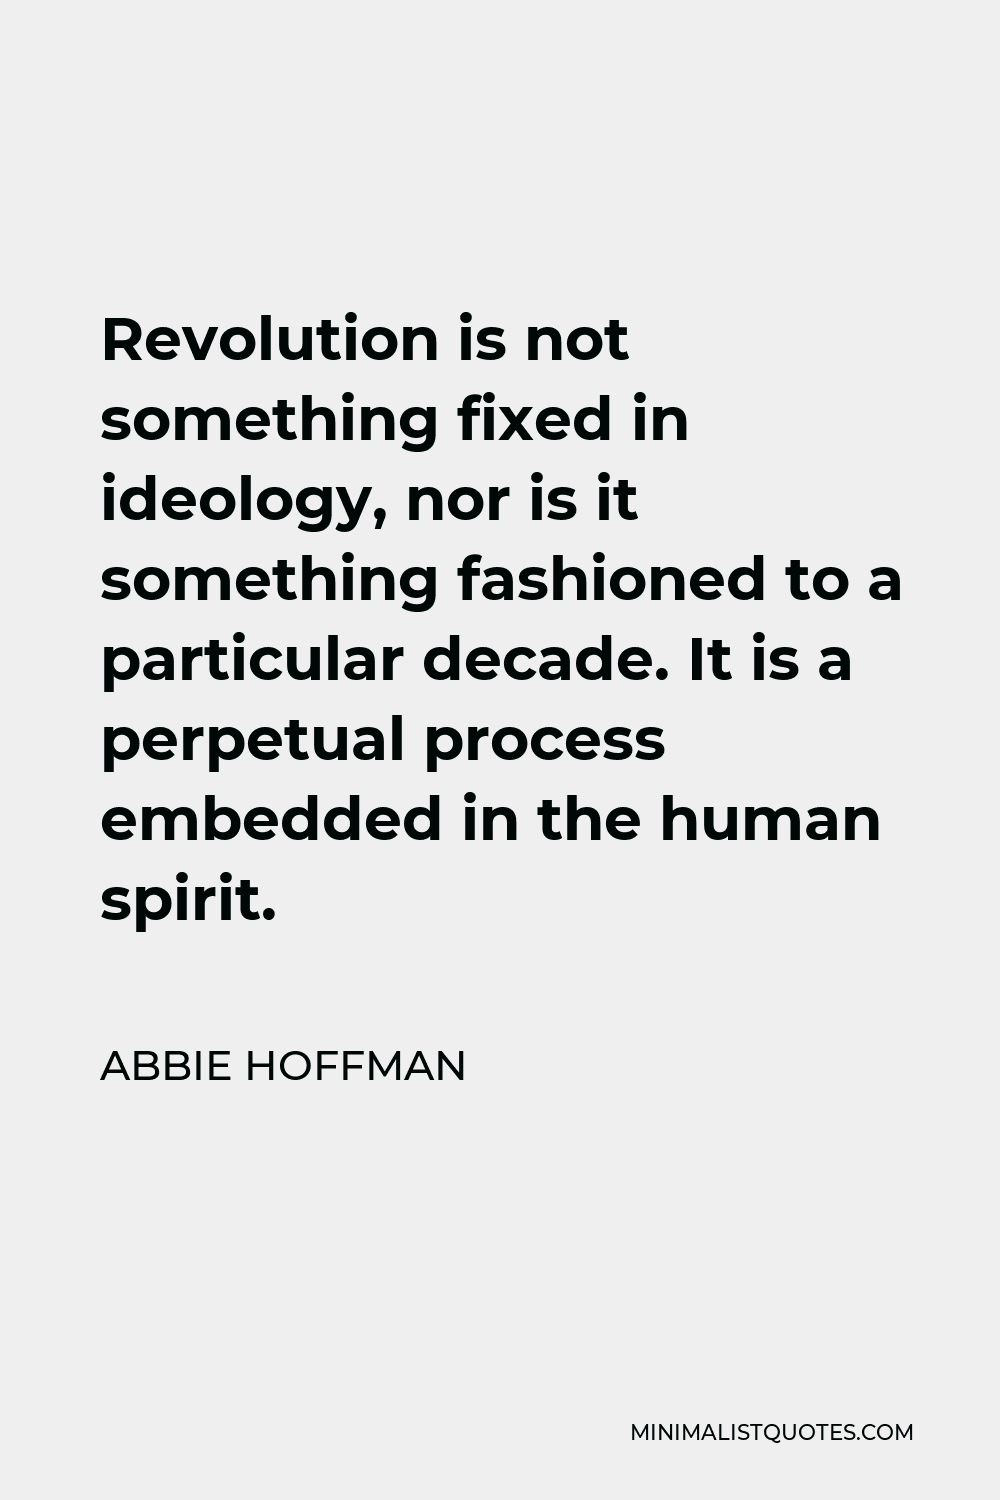 Abbie Hoffman Quote - Revolution is not something fixed in ideology, nor is it something fashioned to a particular decade. It is a perpetual process embedded in the human spirit.